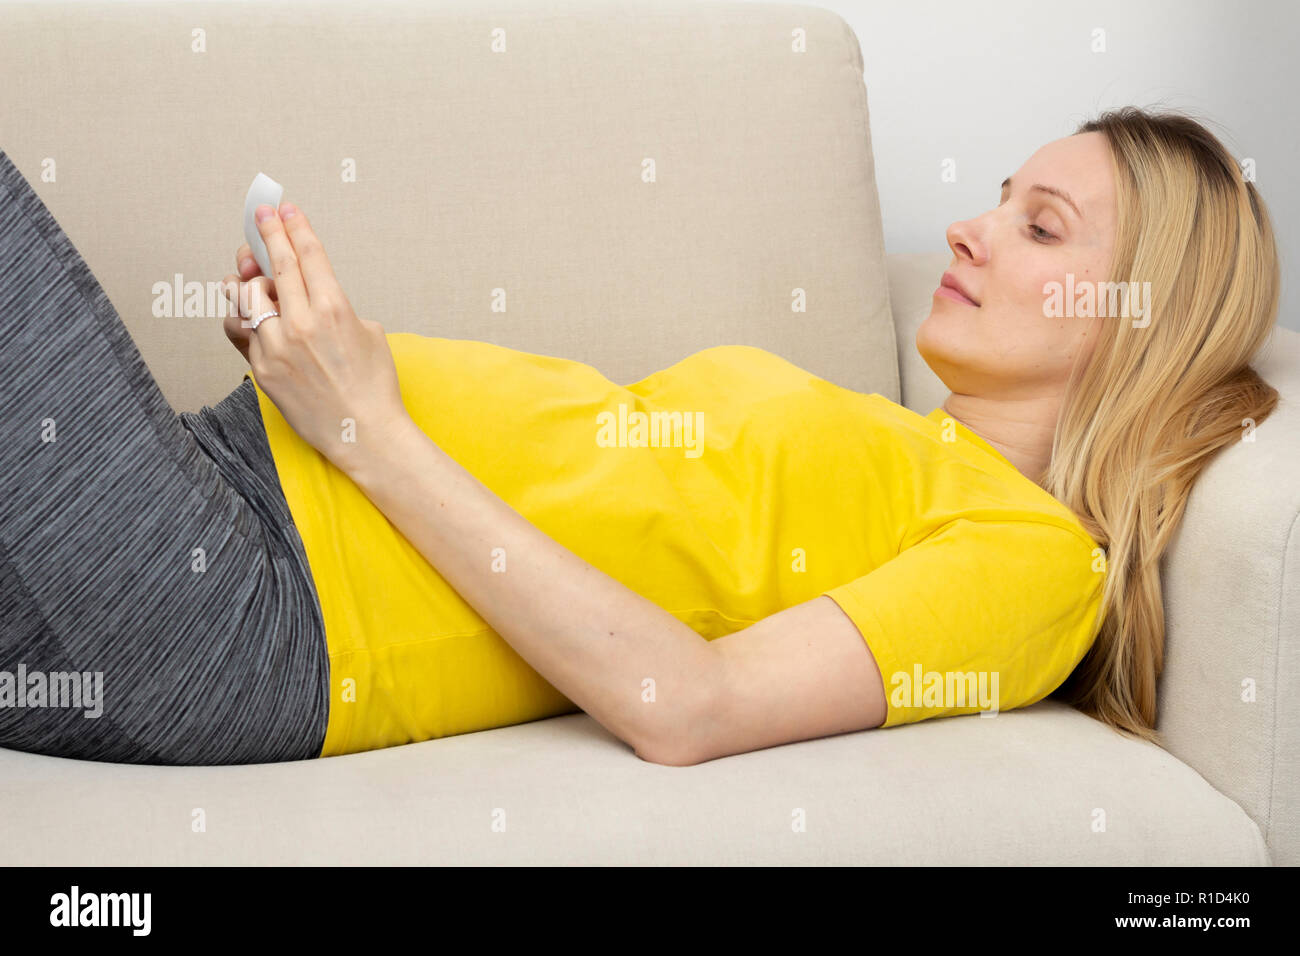 Pregnant woman lying on sofa Banque D'Images